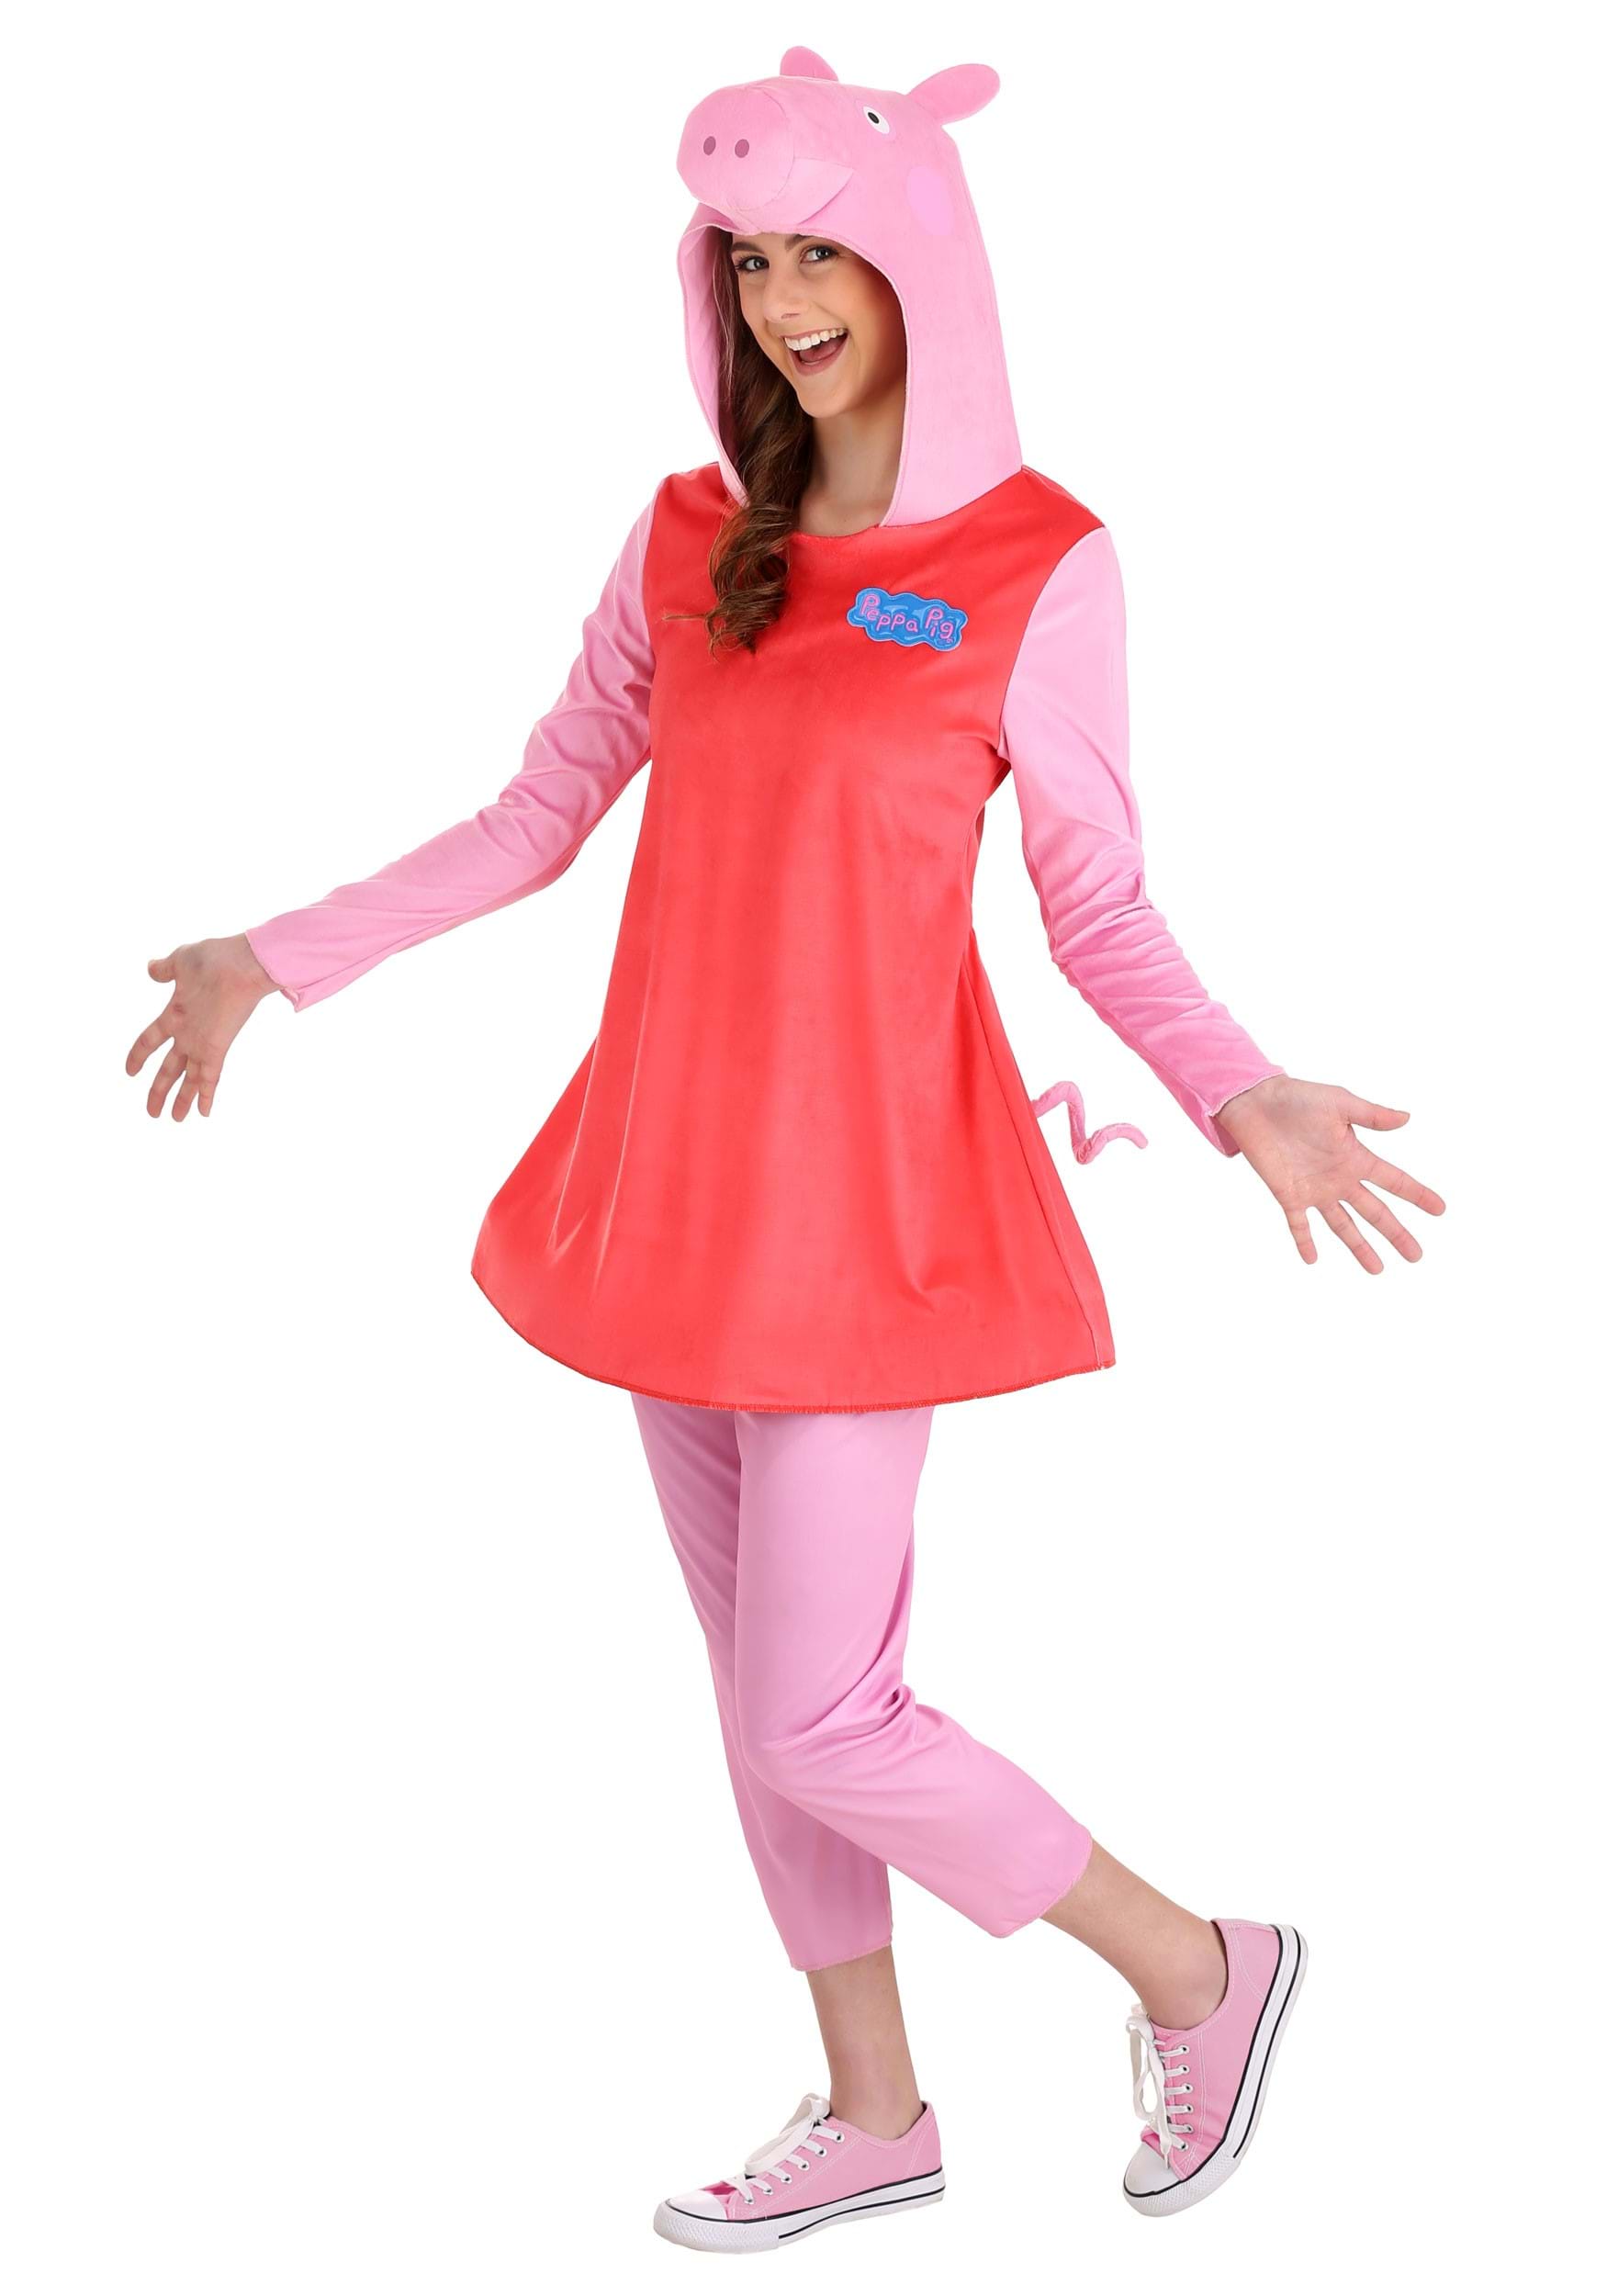 Photos - Fancy Dress Peppa Disguise Limited  Pig Women's Deluxe Costume Pink/Red DI120809 